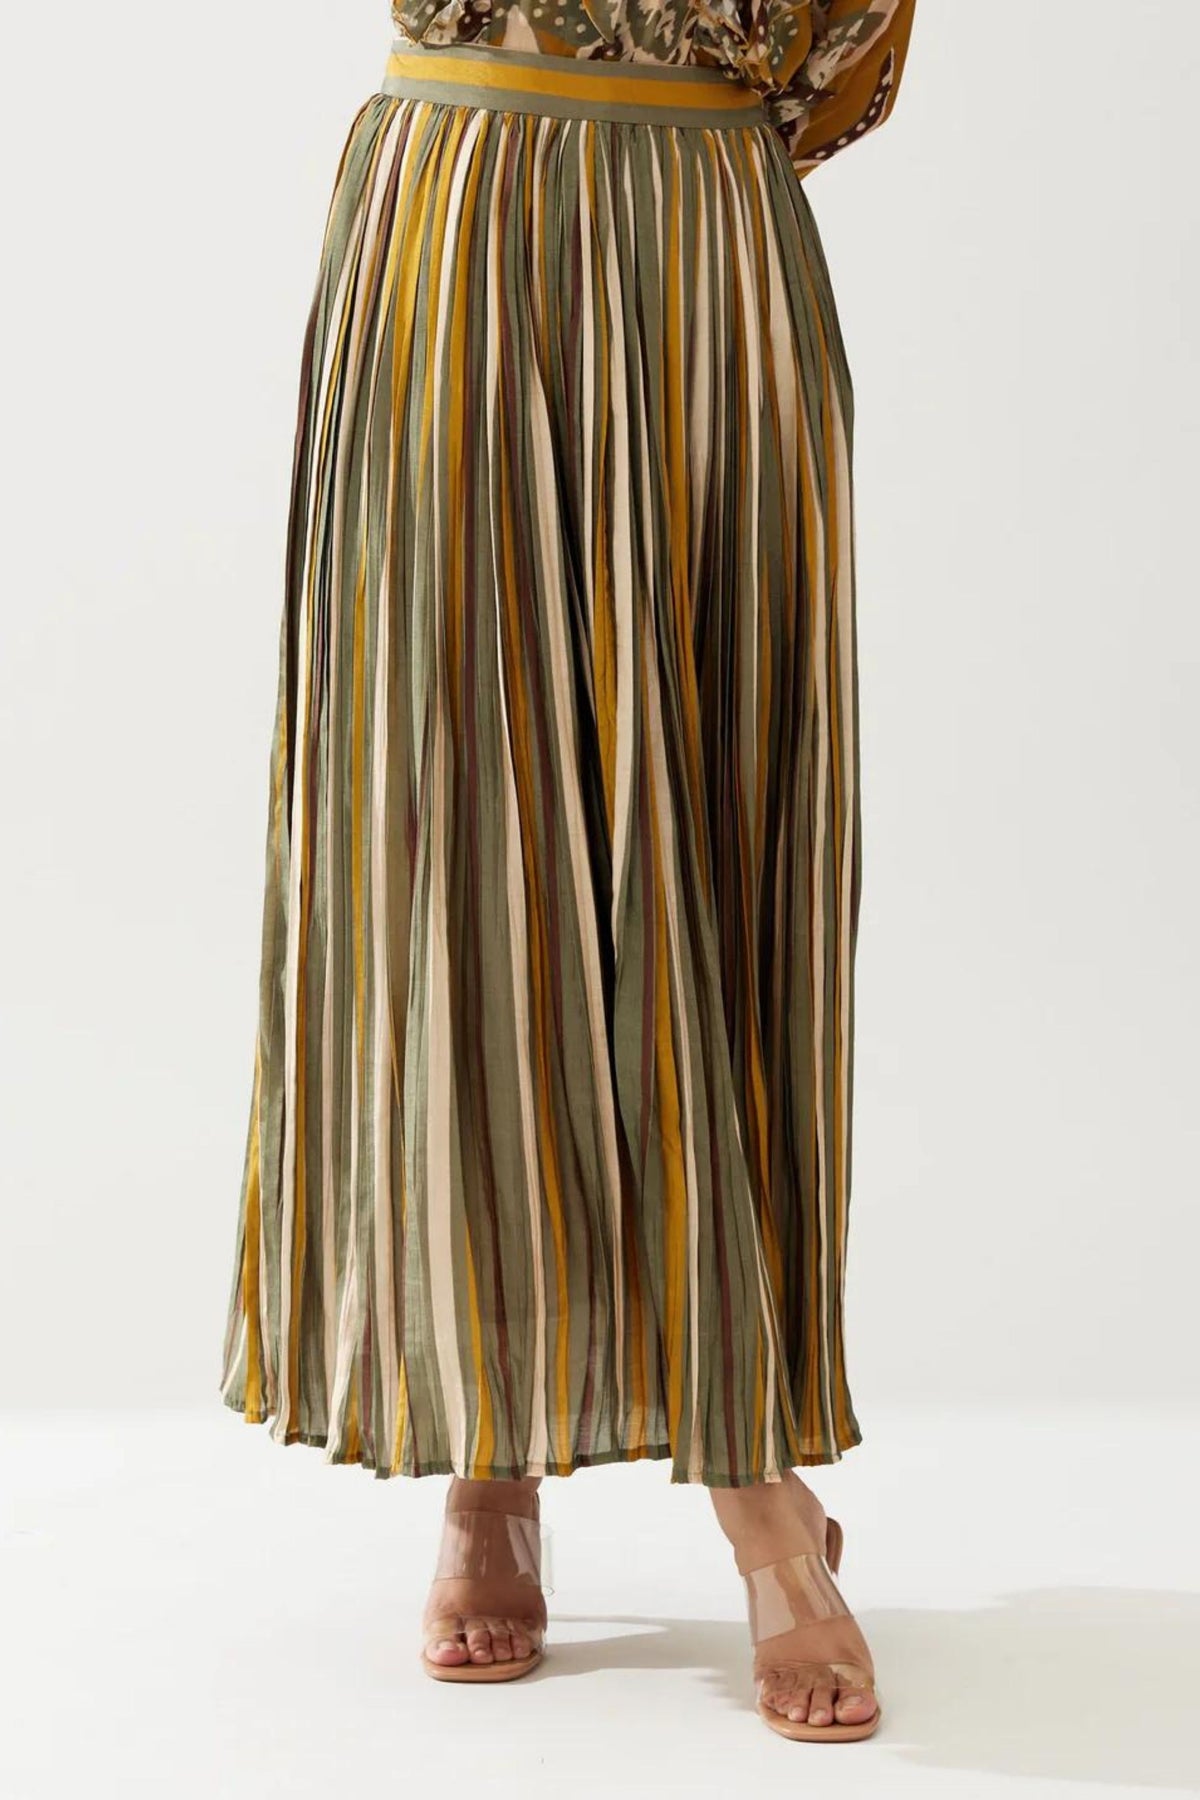 Mustard And Olive Stripe Skirt